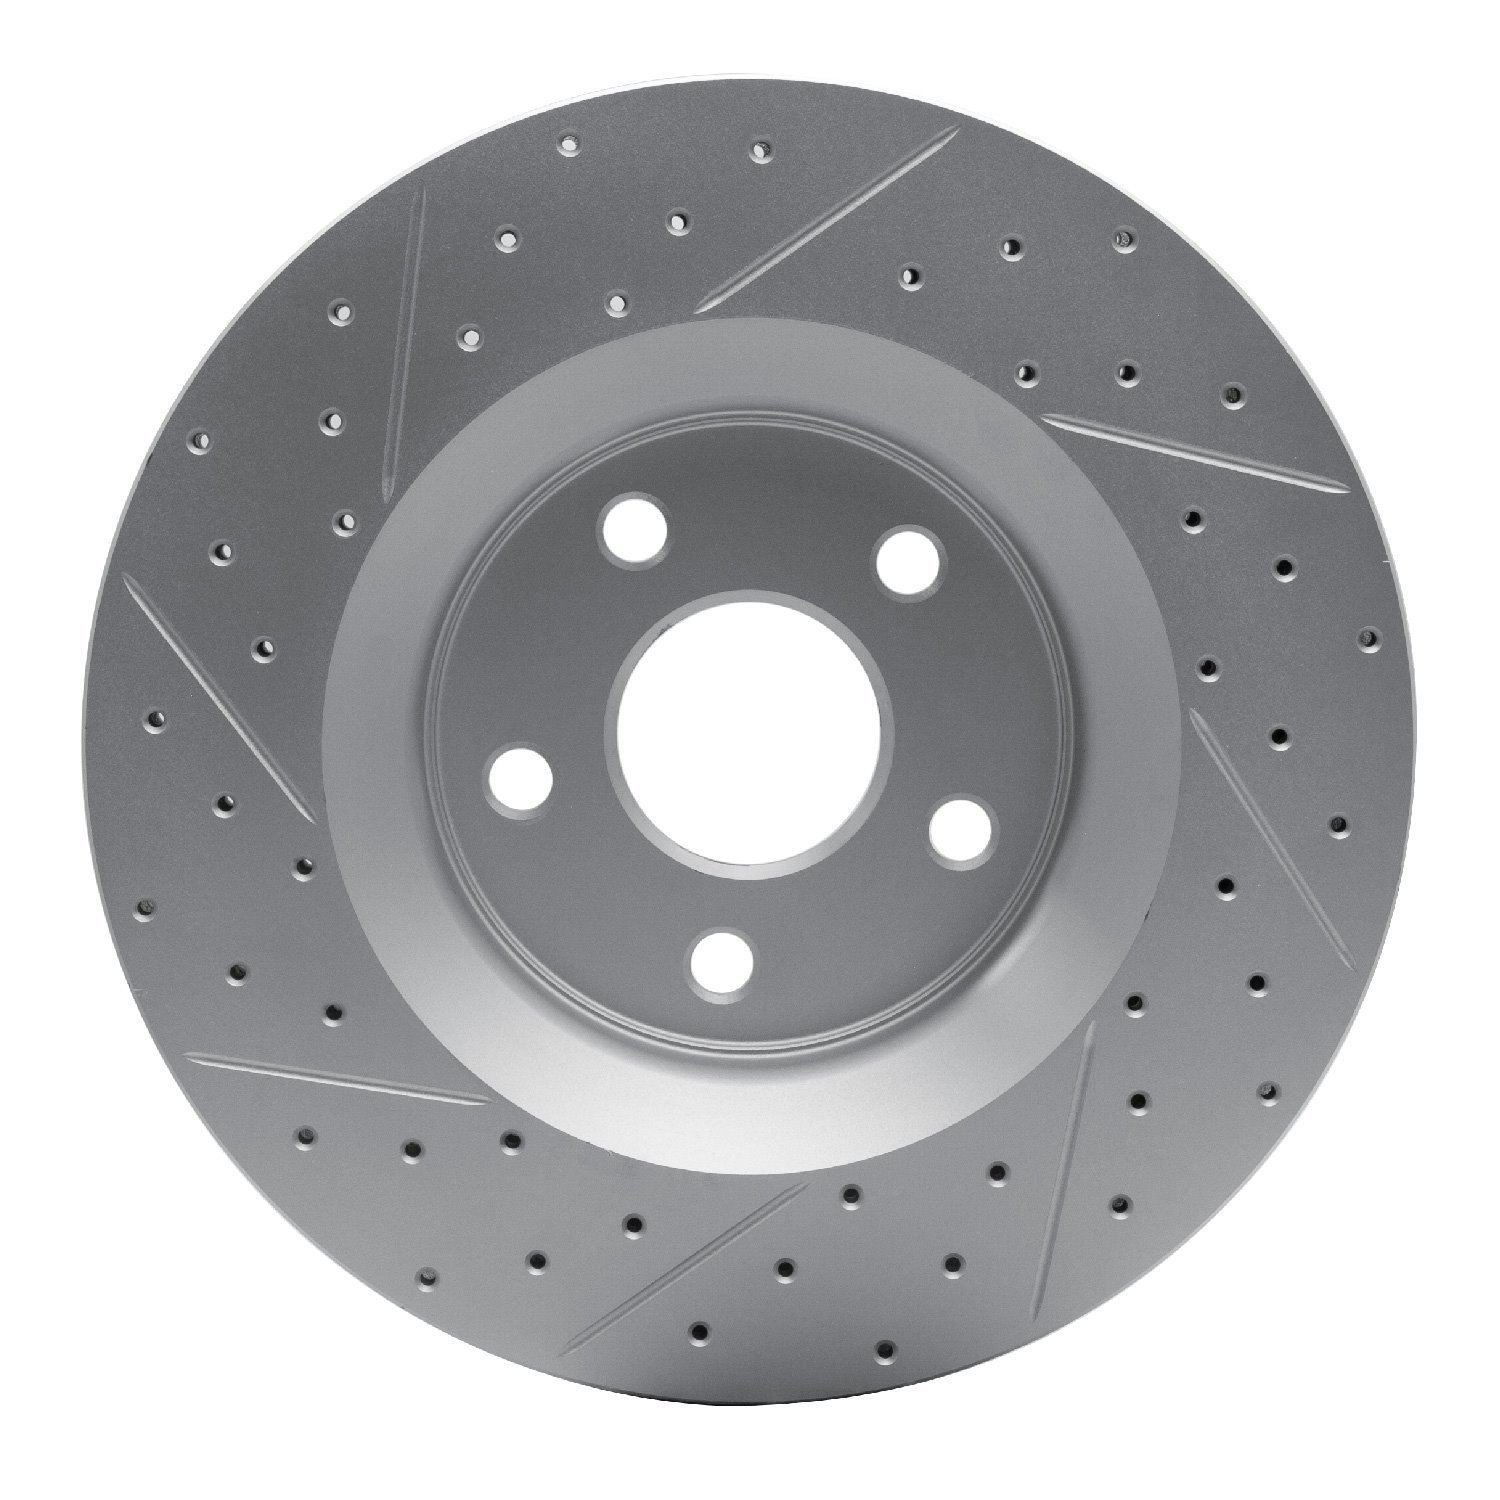 830-42007R Geoperformance Drilled/Slotted Brake Rotor, Fits Select Mopar, Position: Front Right